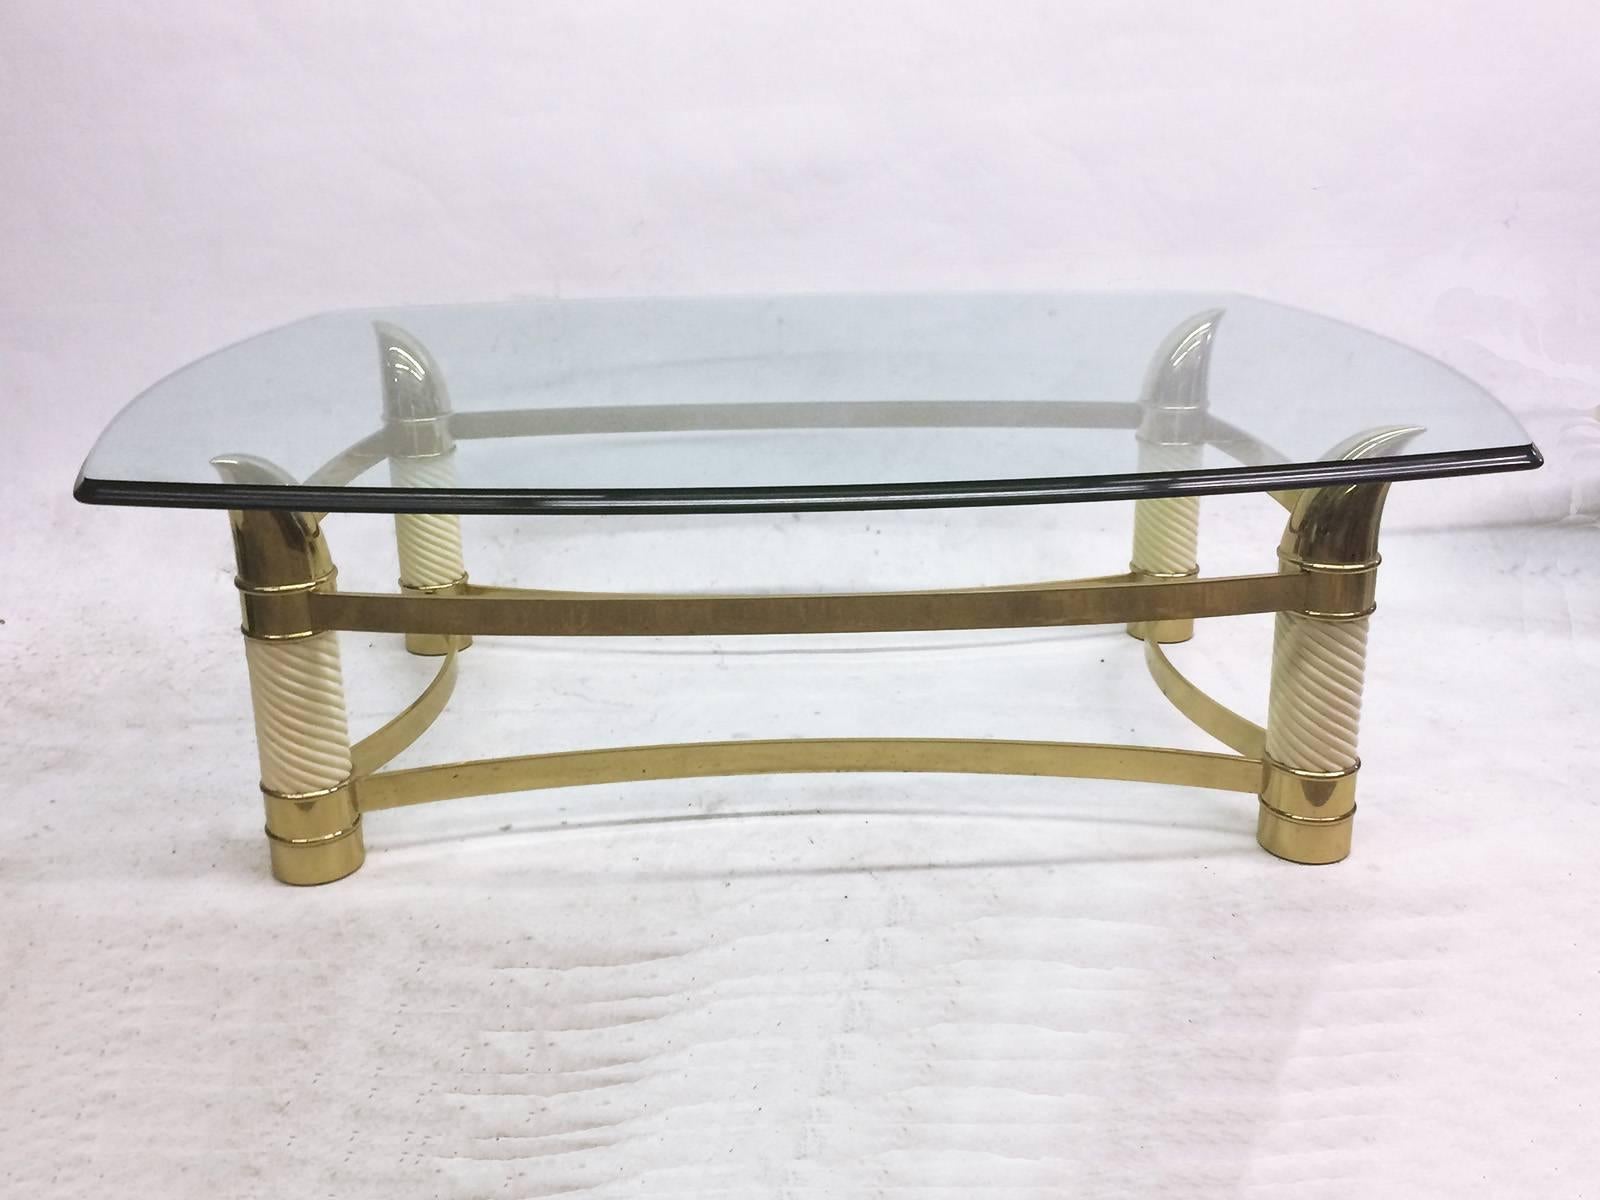 This Hollywood Regency coffee table is finished in white lacquer and brass. The beveled glass top surface rests on four brass horn-like supports that cantilever over the peaks. Four twisted columns on each corner have brass detailing at the base and